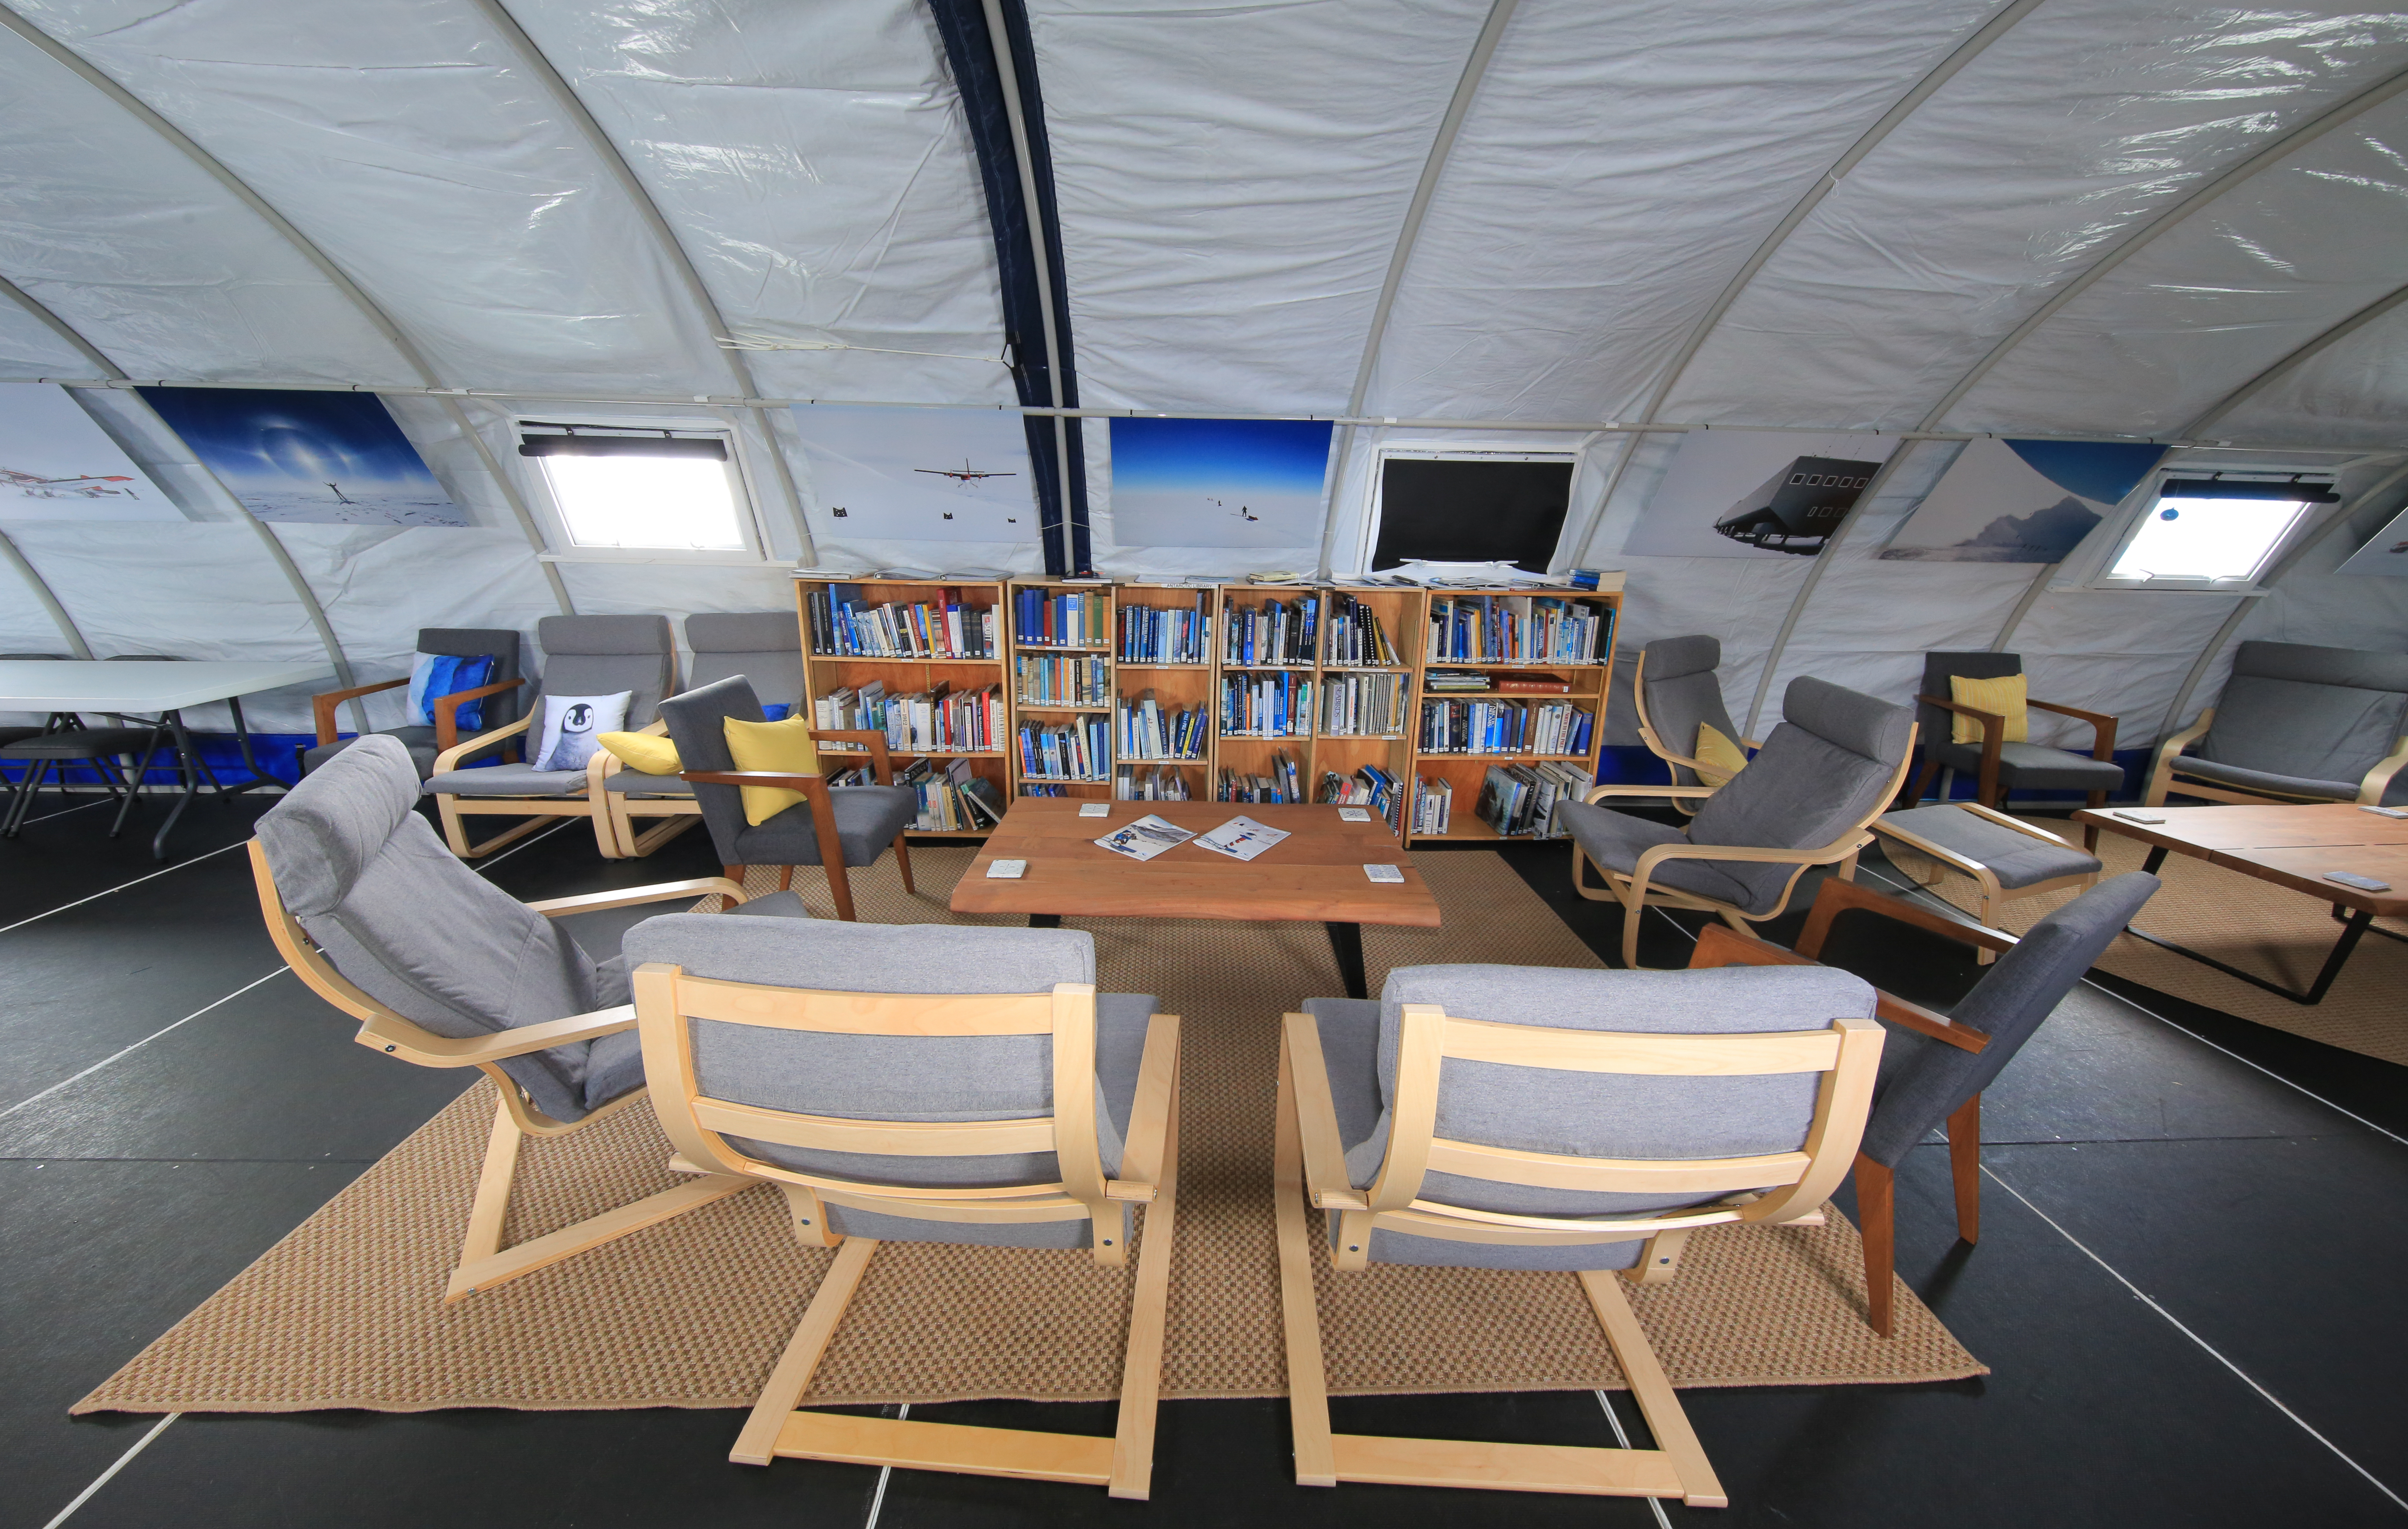 The Yelcho lounge includes a library of polar books